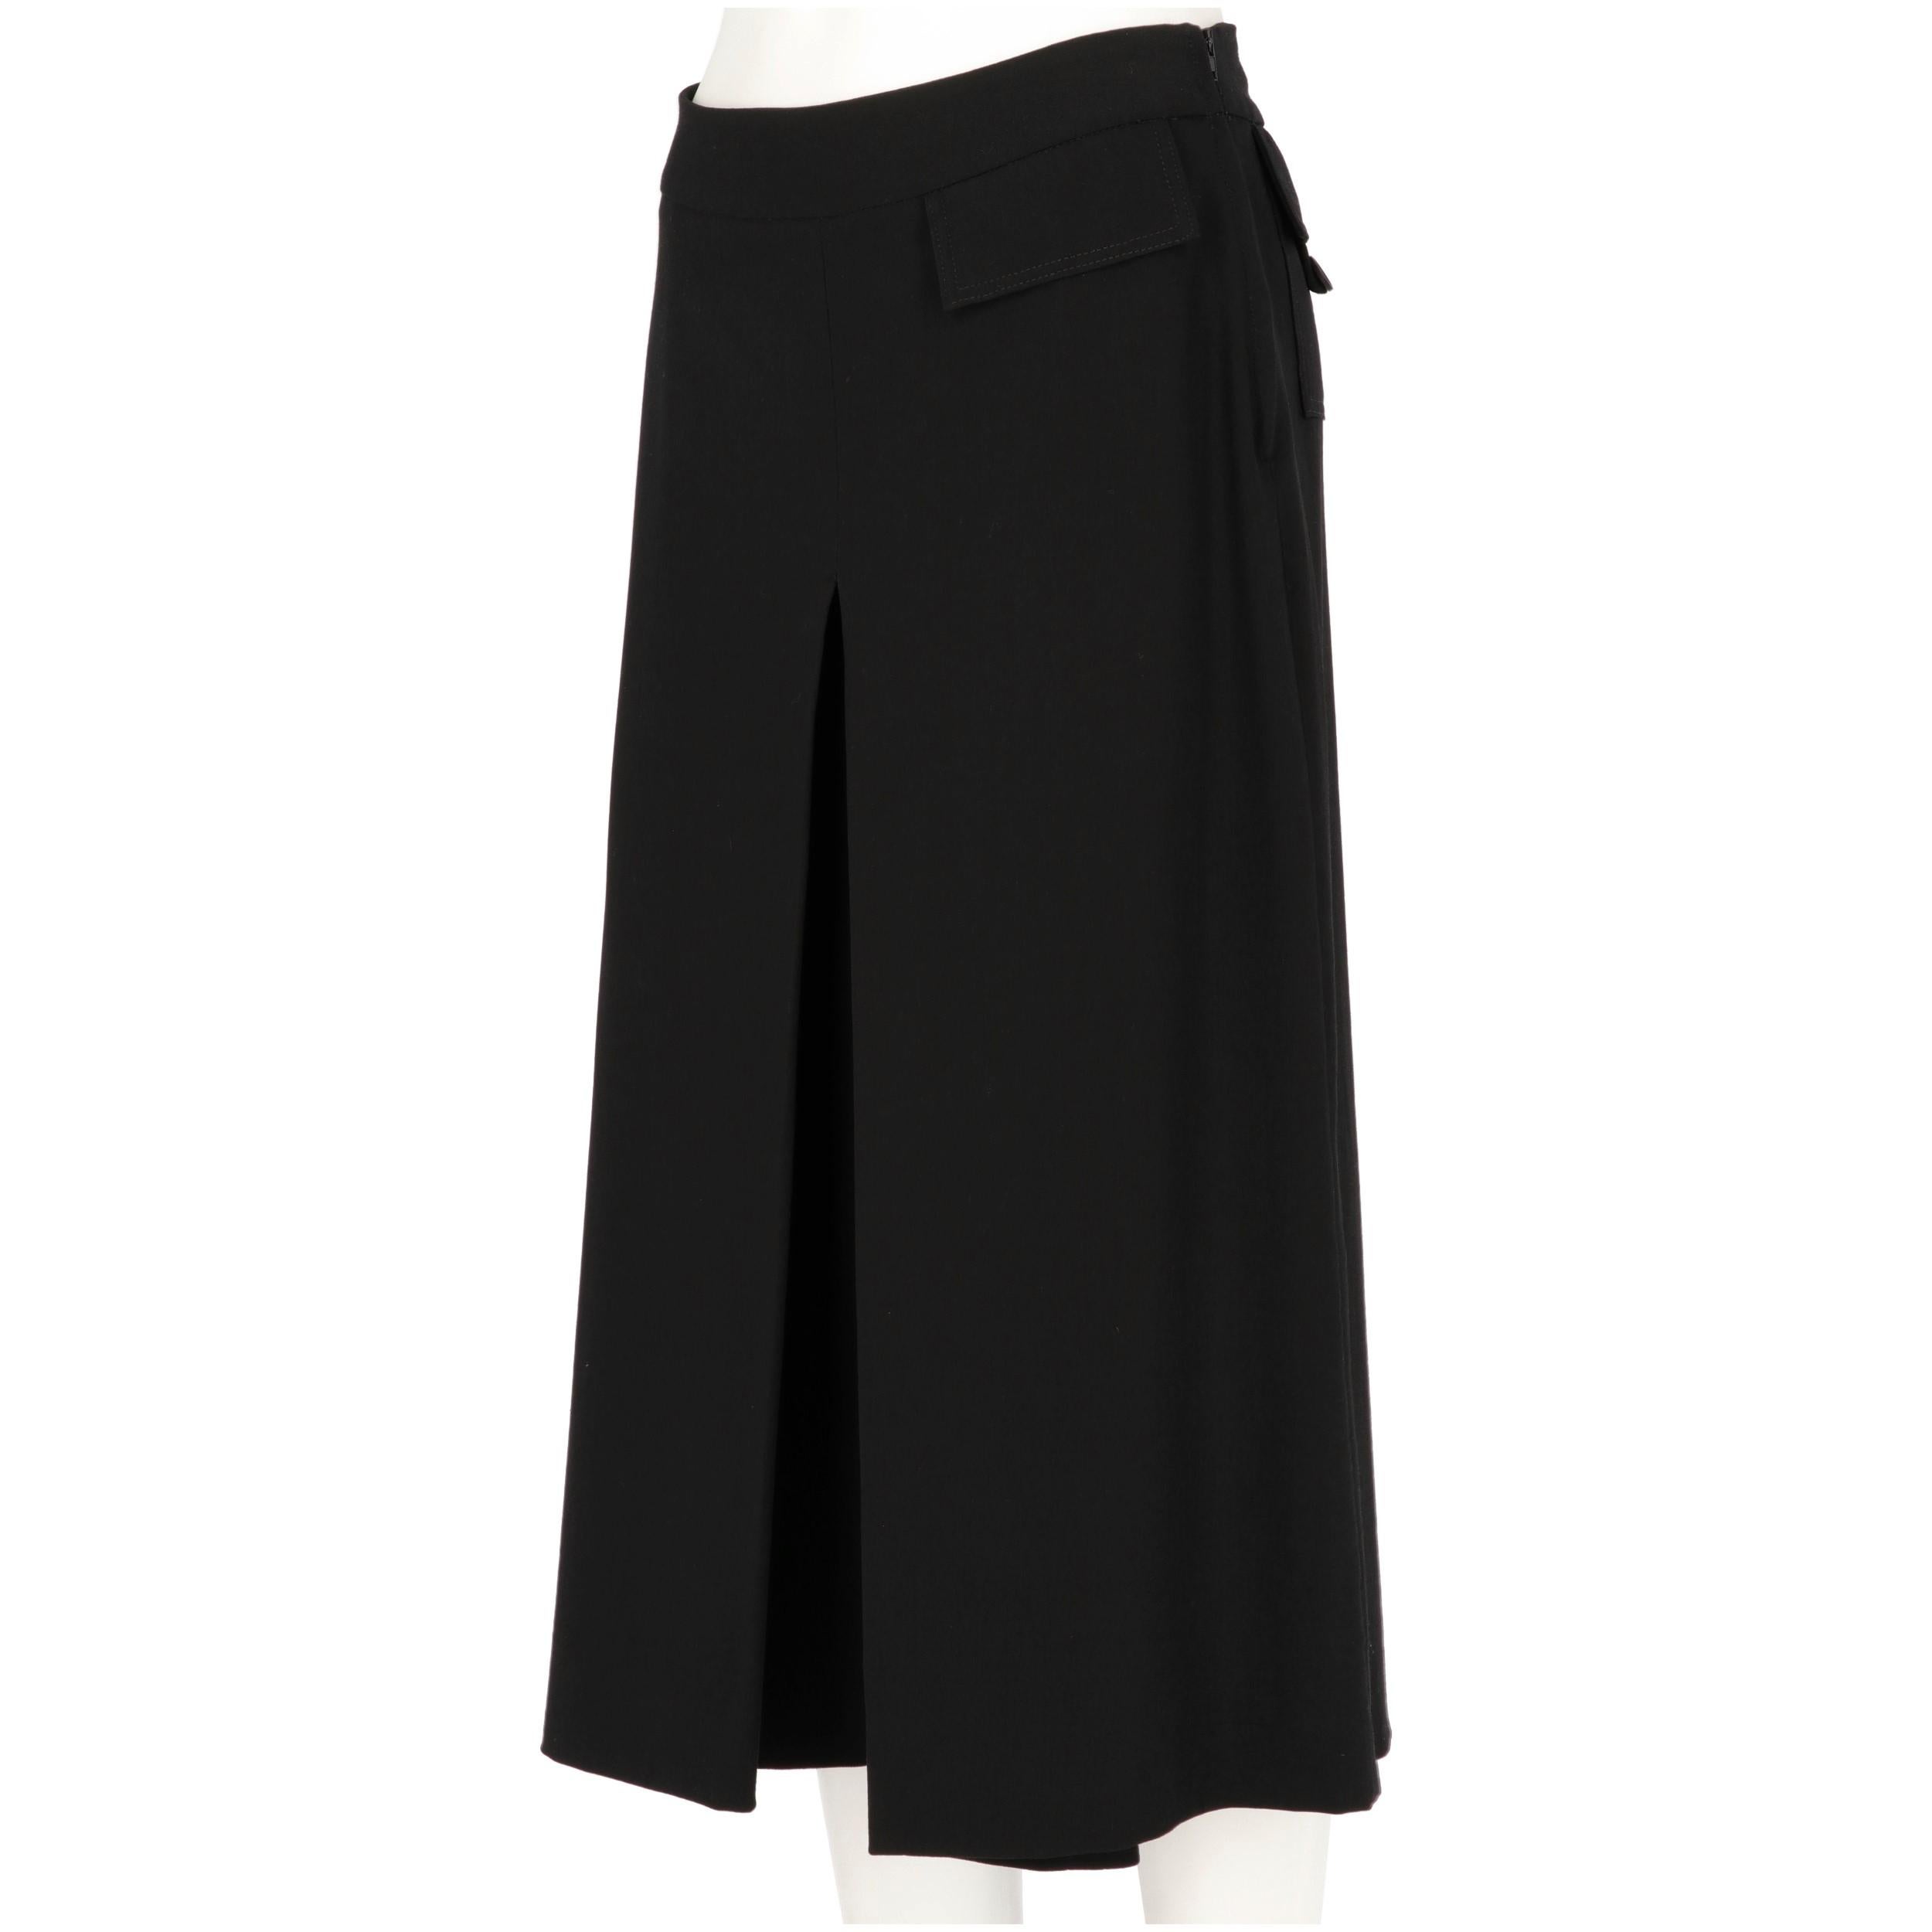 Antonio Marras black wool blend culottes. Wide leg model with central cannon pleat on the front, side zip closure, faux front pocket with flap and a rear patch pocket with button. Item shows very light signs of wear on the fabric, as shown in the